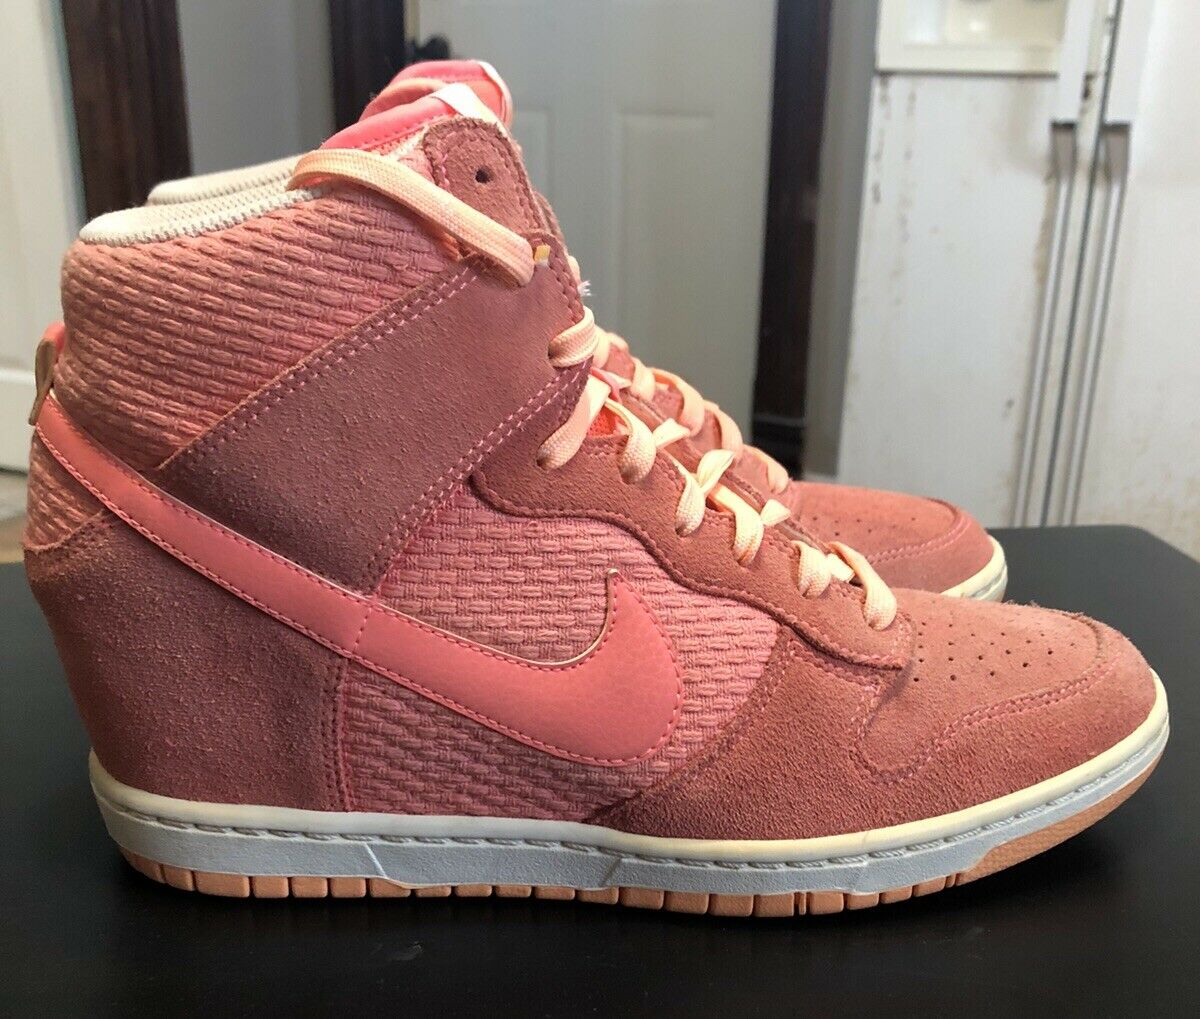 Nike Dunk Sky Hi Essential Wedge Pink Sneakers Shoes 644877-602 Women’s Size 11